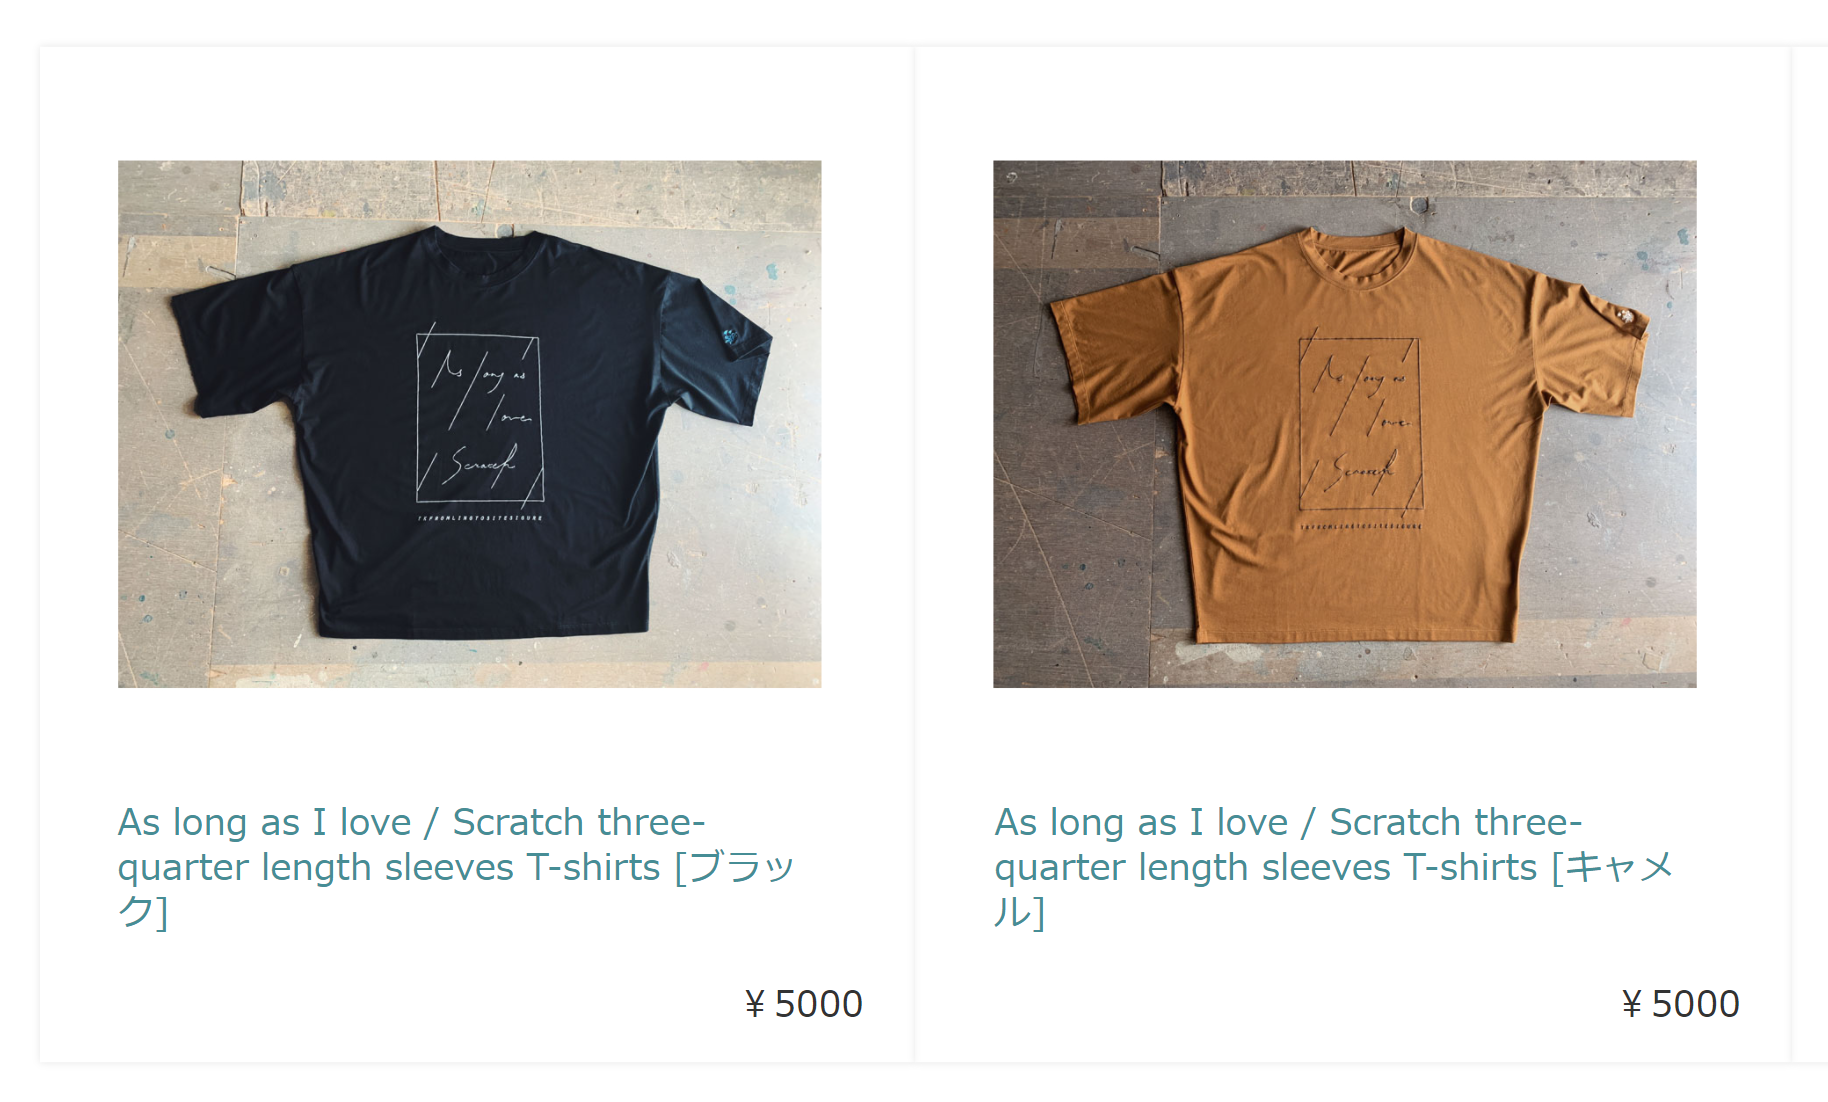 TK from 凛として時雨のライブグッズ『As long as I love / Scratch three-quarter length sleeves T-shirts』のイメージ